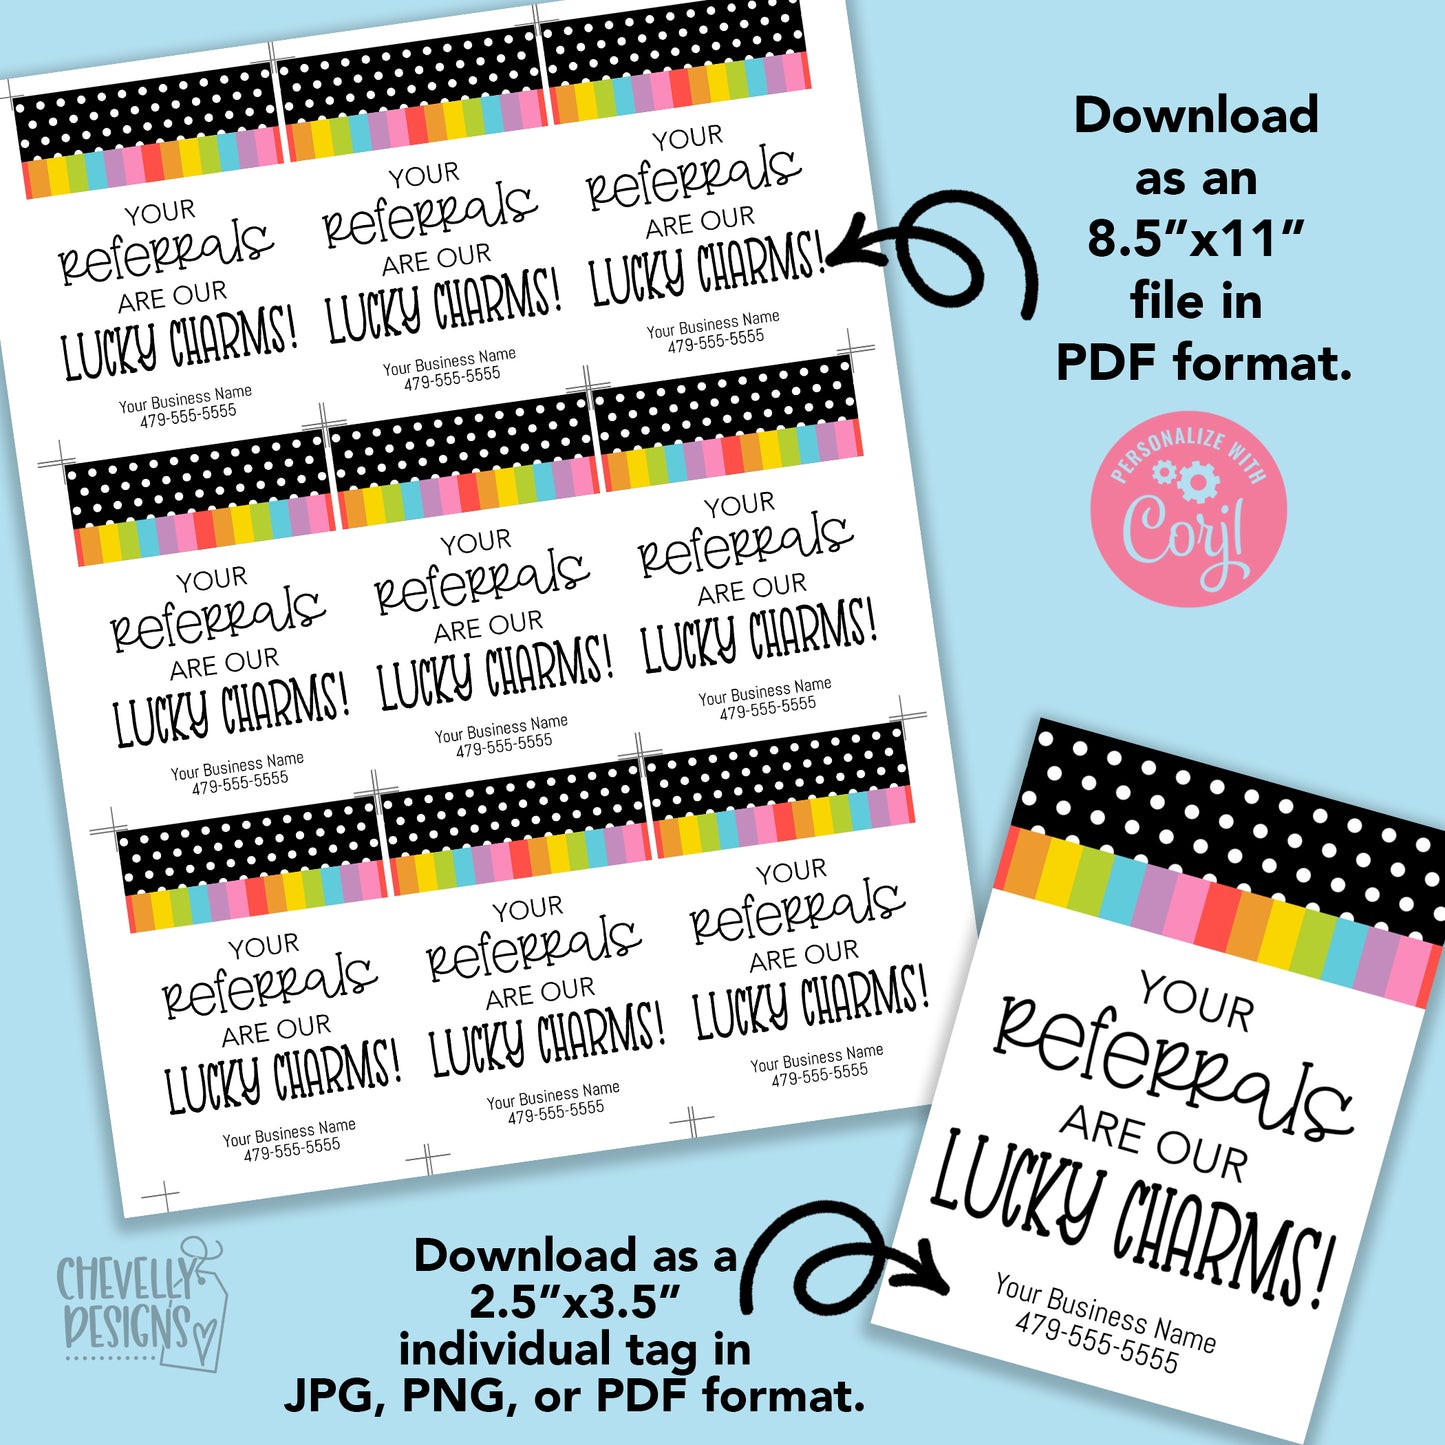 Editable - Your Referrals are our Lucky Charms - Referral Gift Tags - Printable Digital File